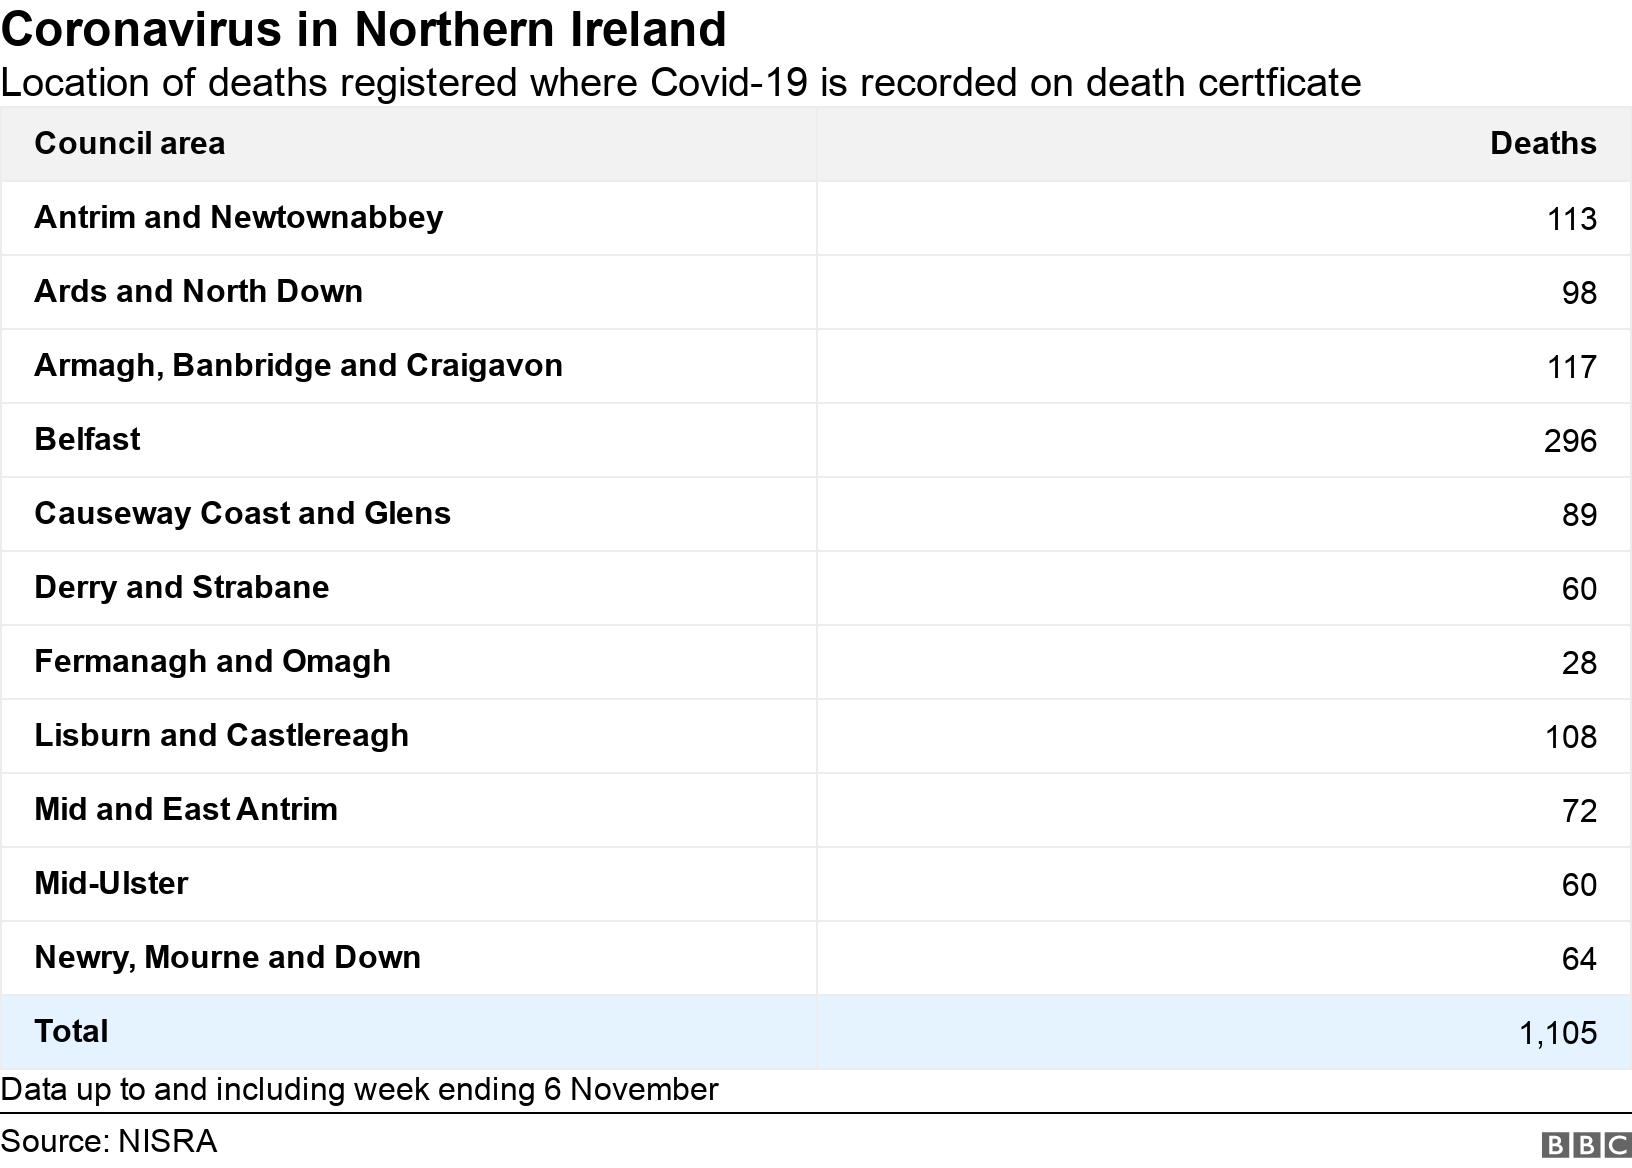 Coronavirus in Northern Ireland. Location of deaths registered where Covid-19 is recorded on death certficate. Data up to and including week ending 6 November.